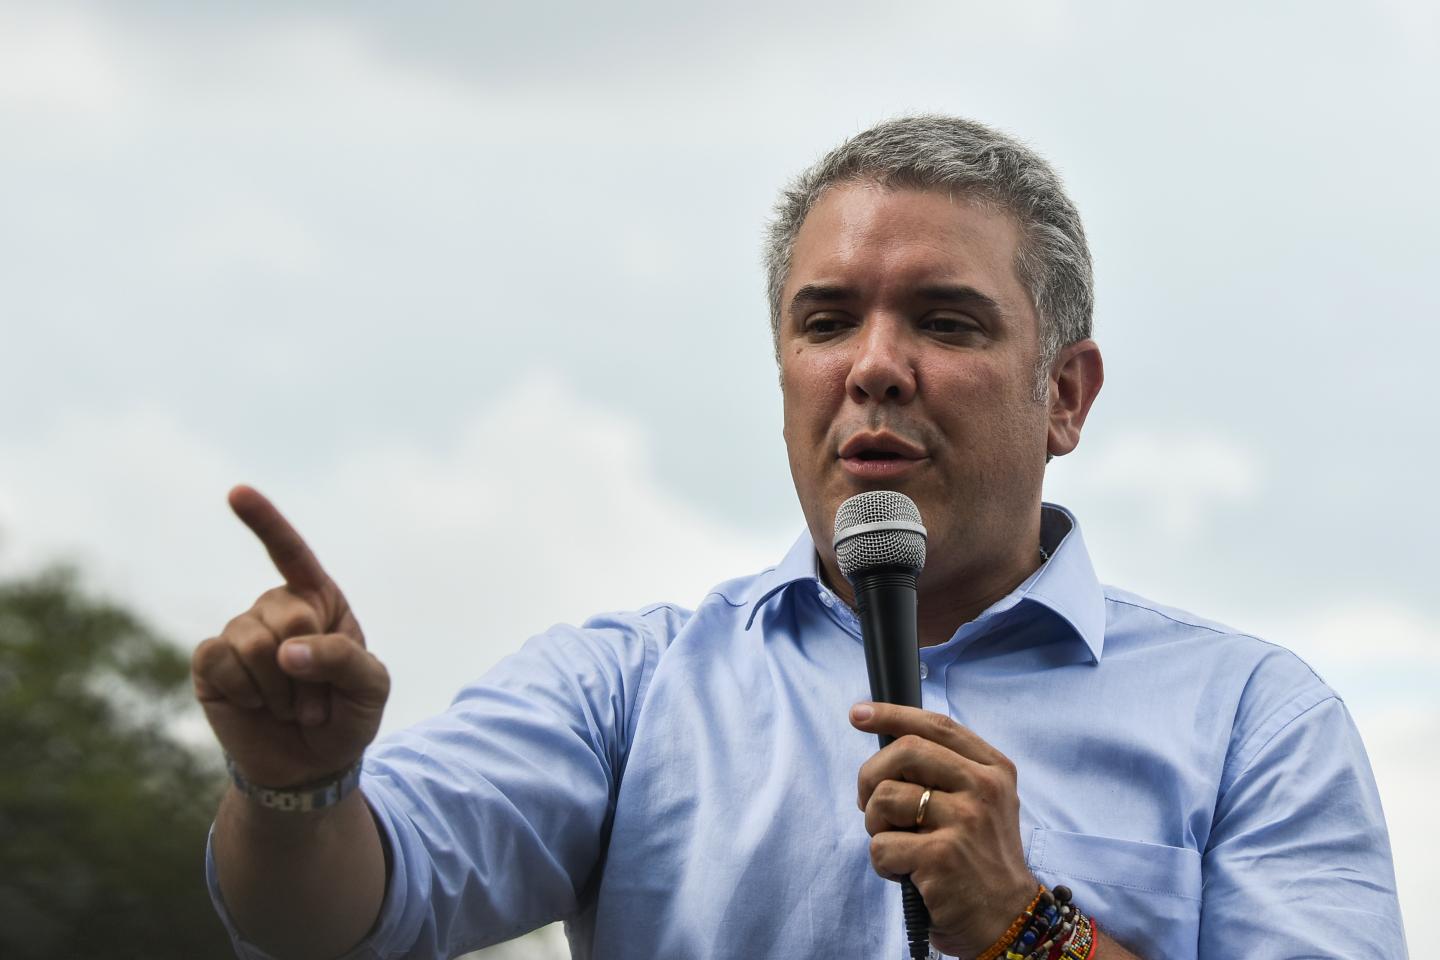 van Duque, the Democratic Center's candidate in Colombia's presidential race, speaks to supporters during a campaign rally in Cali on June 8. LUIS ROBAYO/AFP/GETTY IMAGES